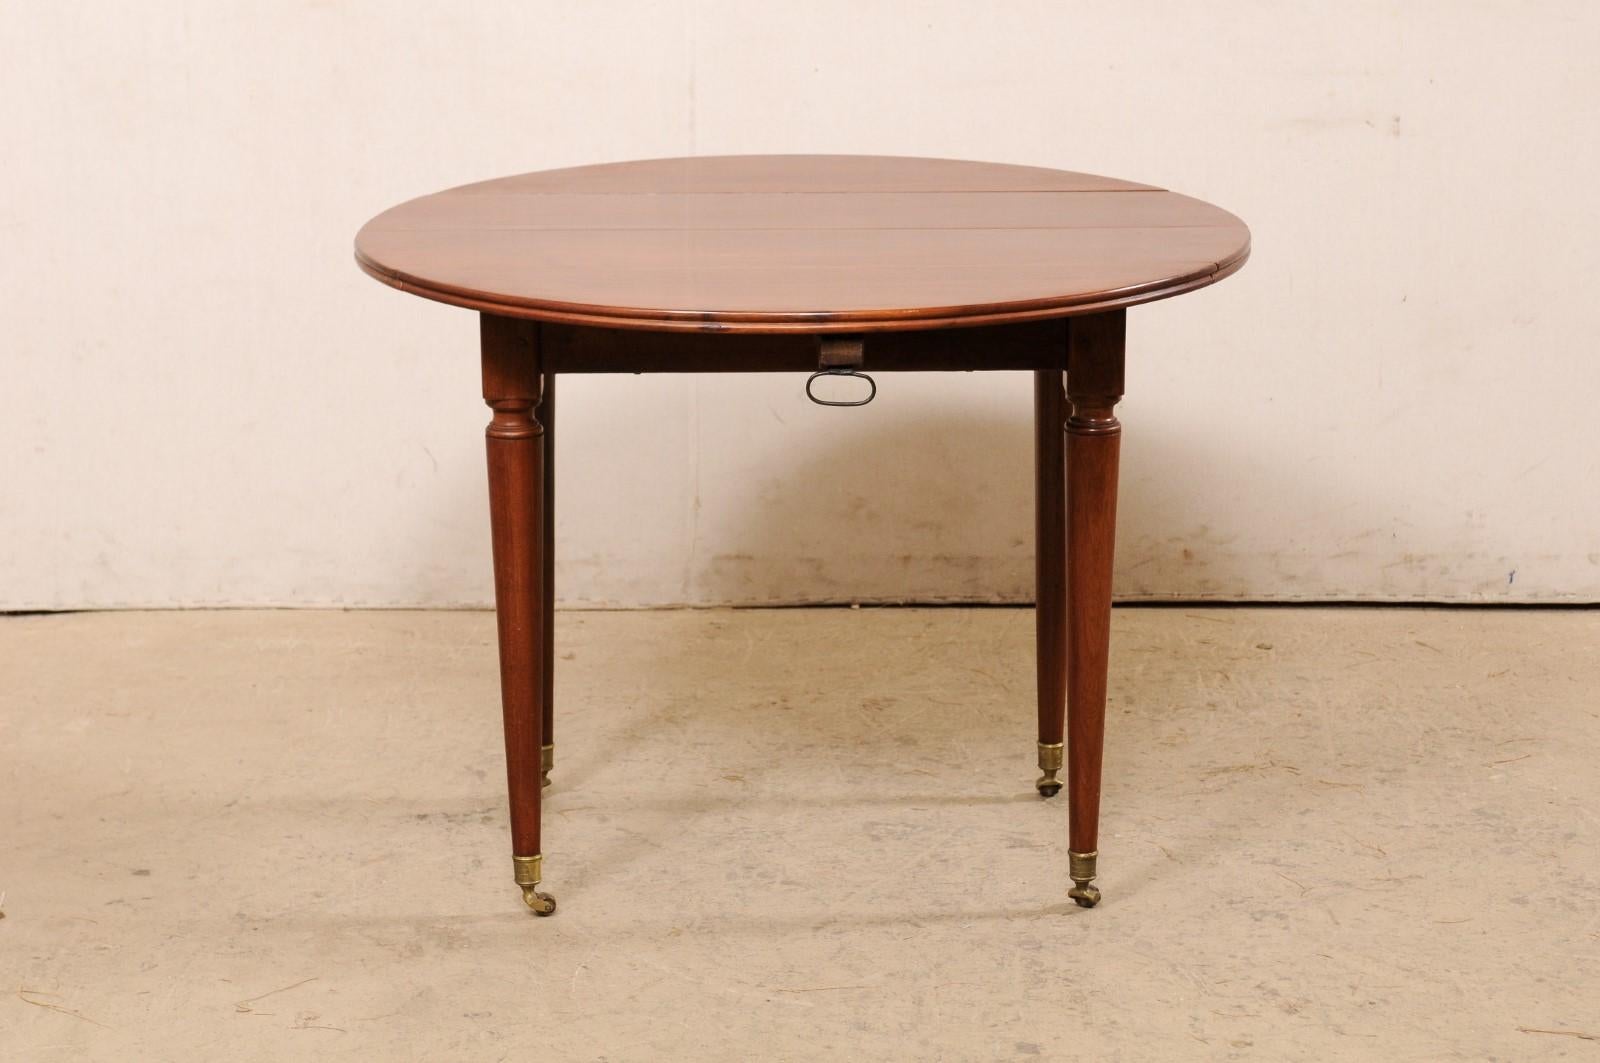 French 19th C. Mahogany Round Table W/Drop Leaves & Petite Brass Caster Feet For Sale 4